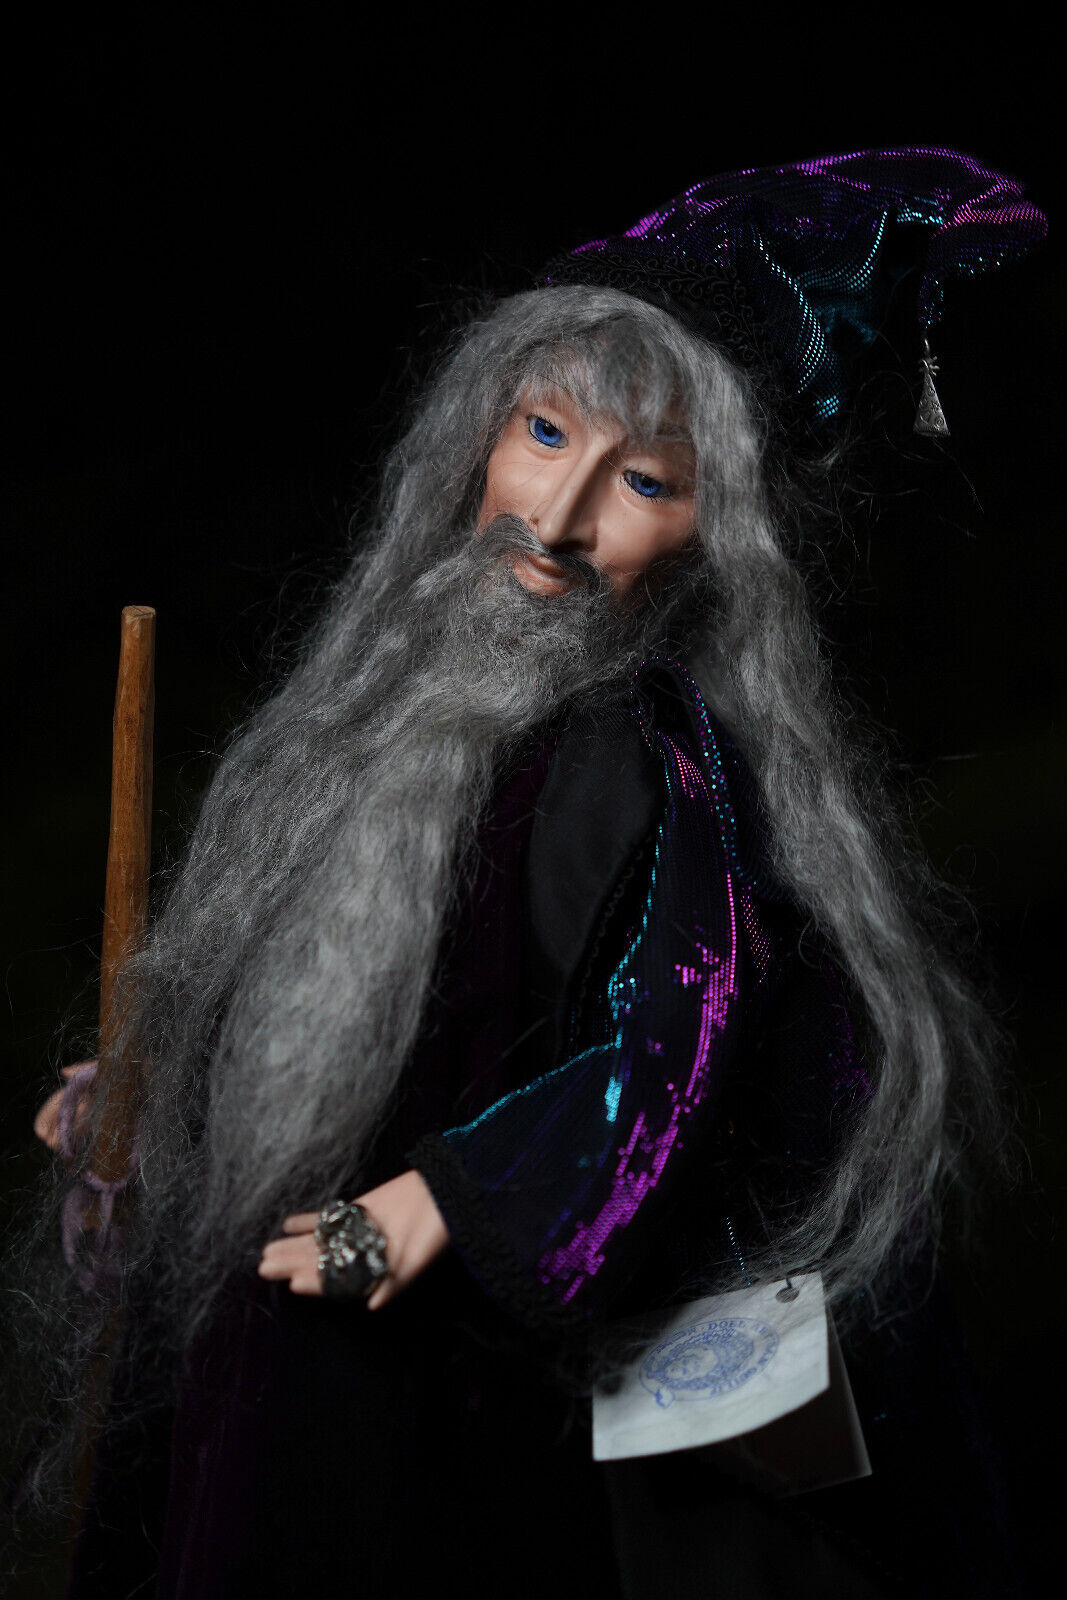 Wizard Magic Doll OOAK Doll Mephisto Doll Artisan Guild Hand Made Artist Signed